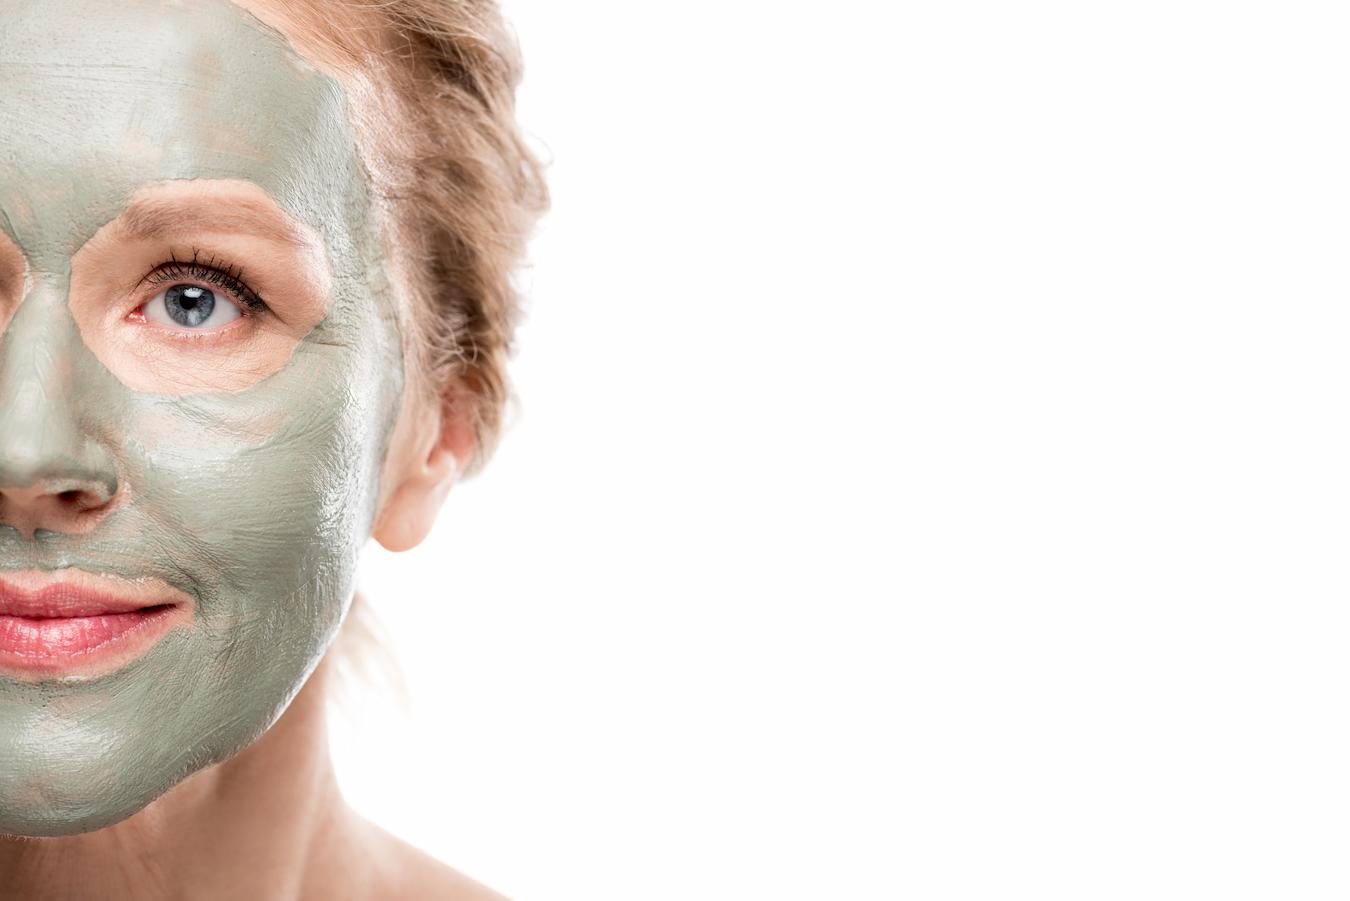 Exfoliators smooths wrinkles and leads to brighter skin